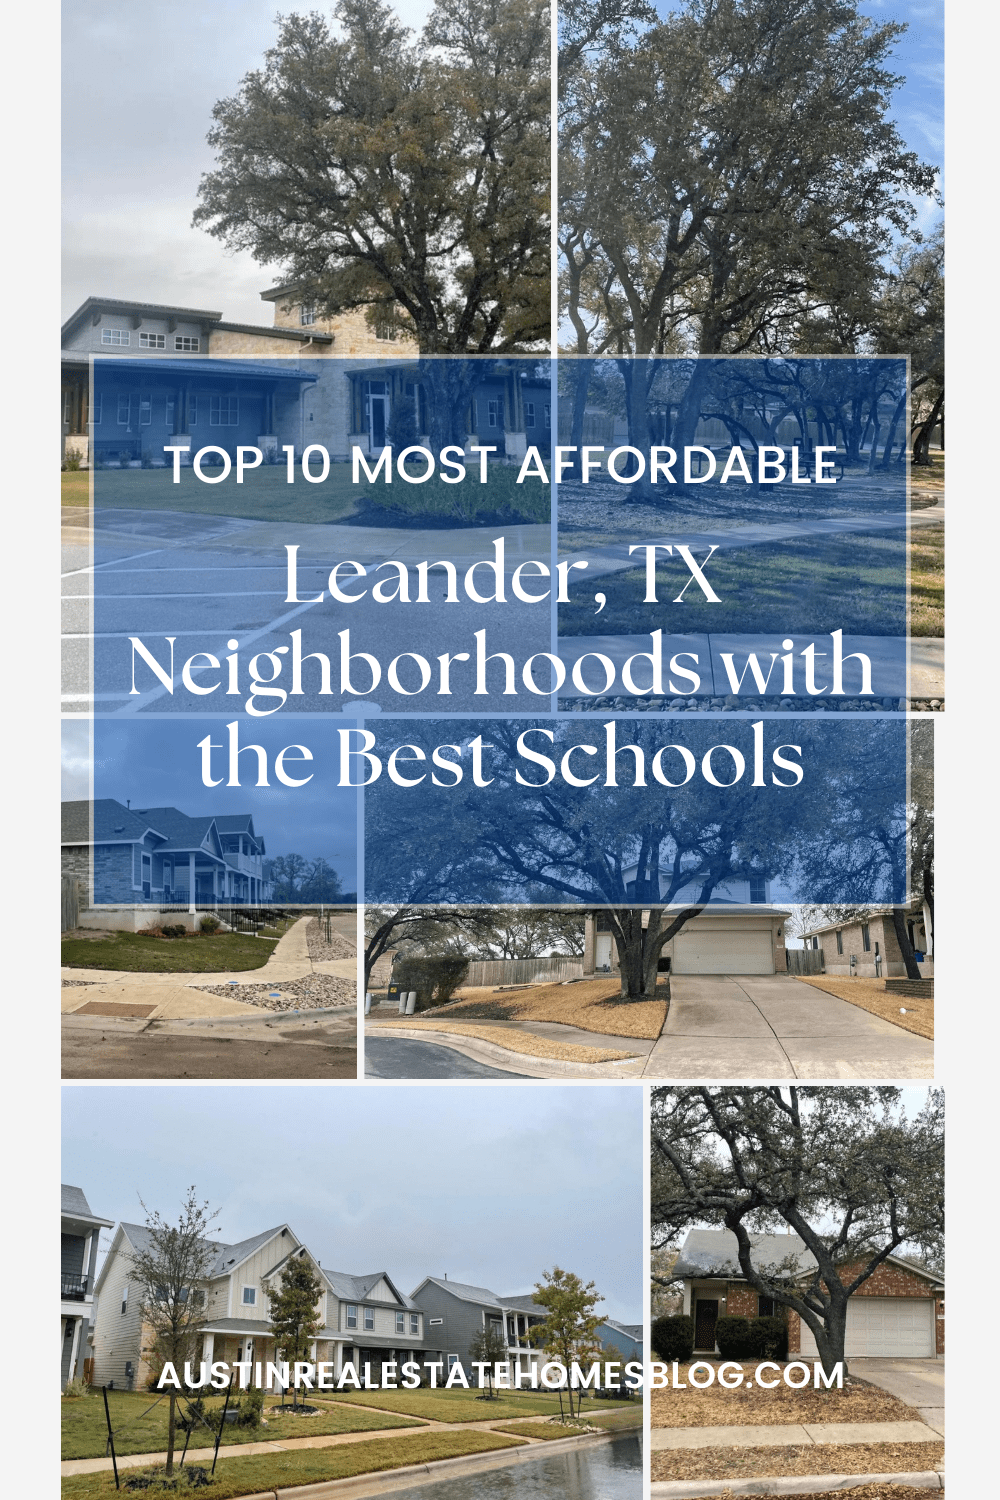 top 10 most affordable Leander TX neighborhoods with the best schools